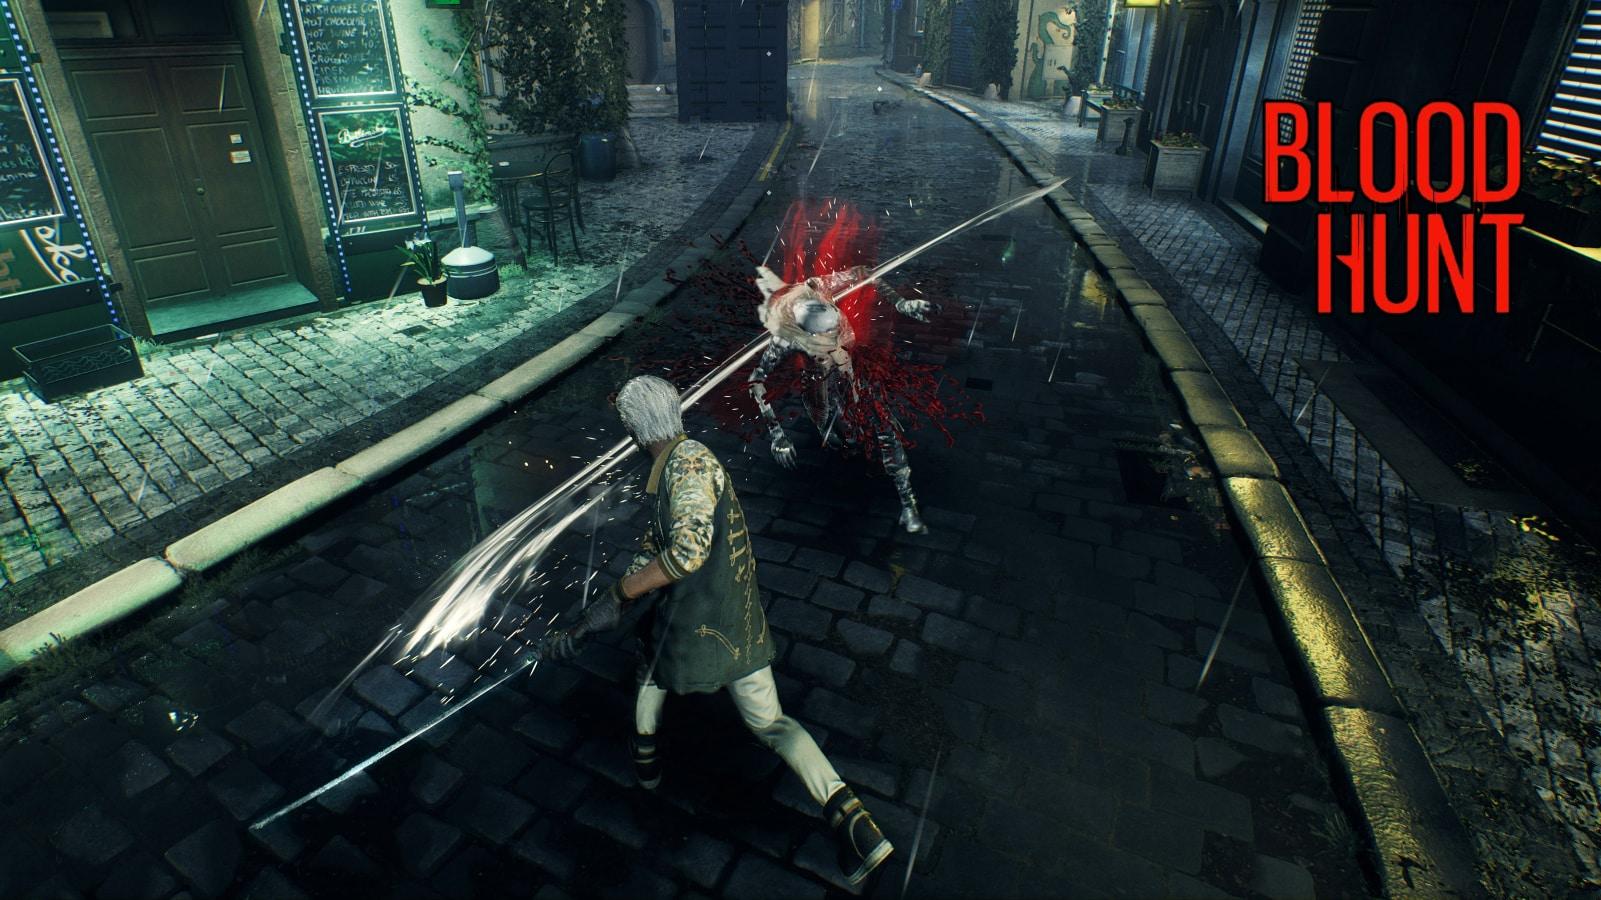 Vampire: The Masquerade - Bloodhunt comes to Steam Early Access on